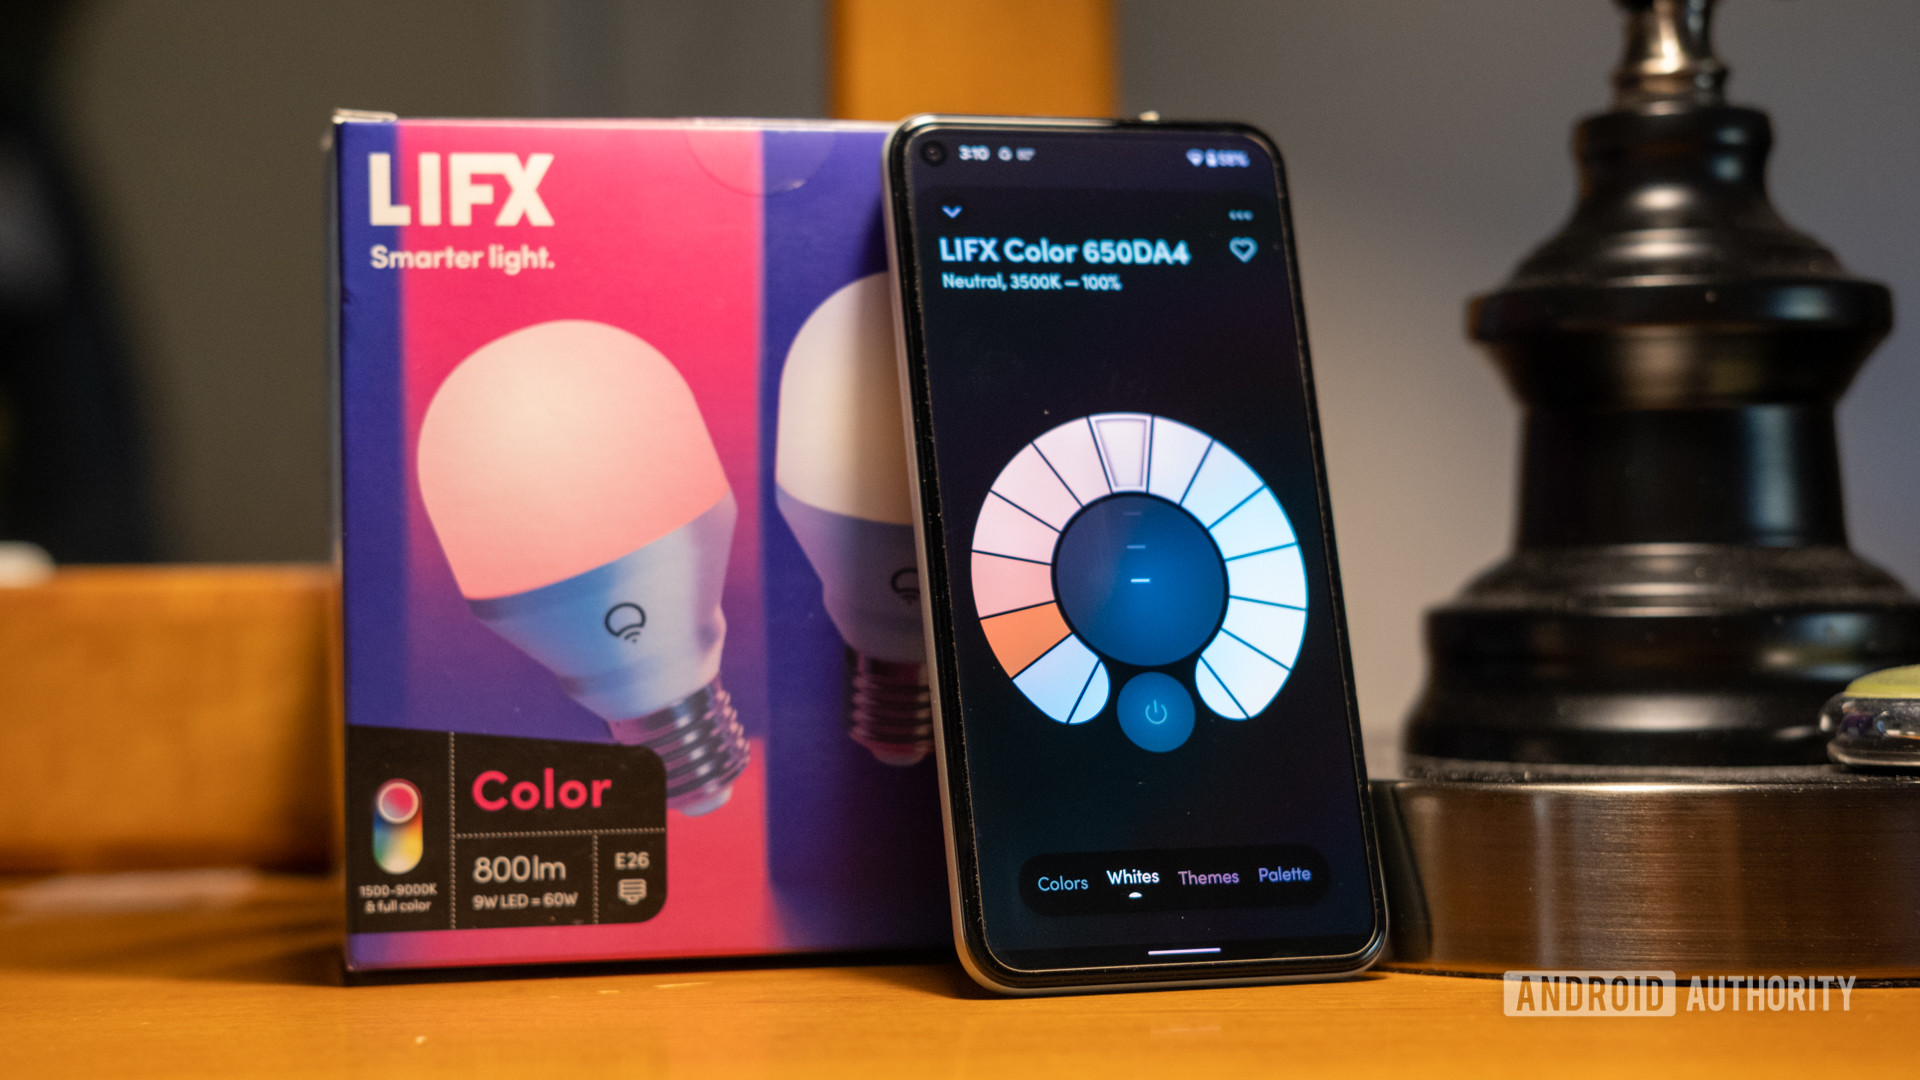 An image of the LIFX Color packaging with the app